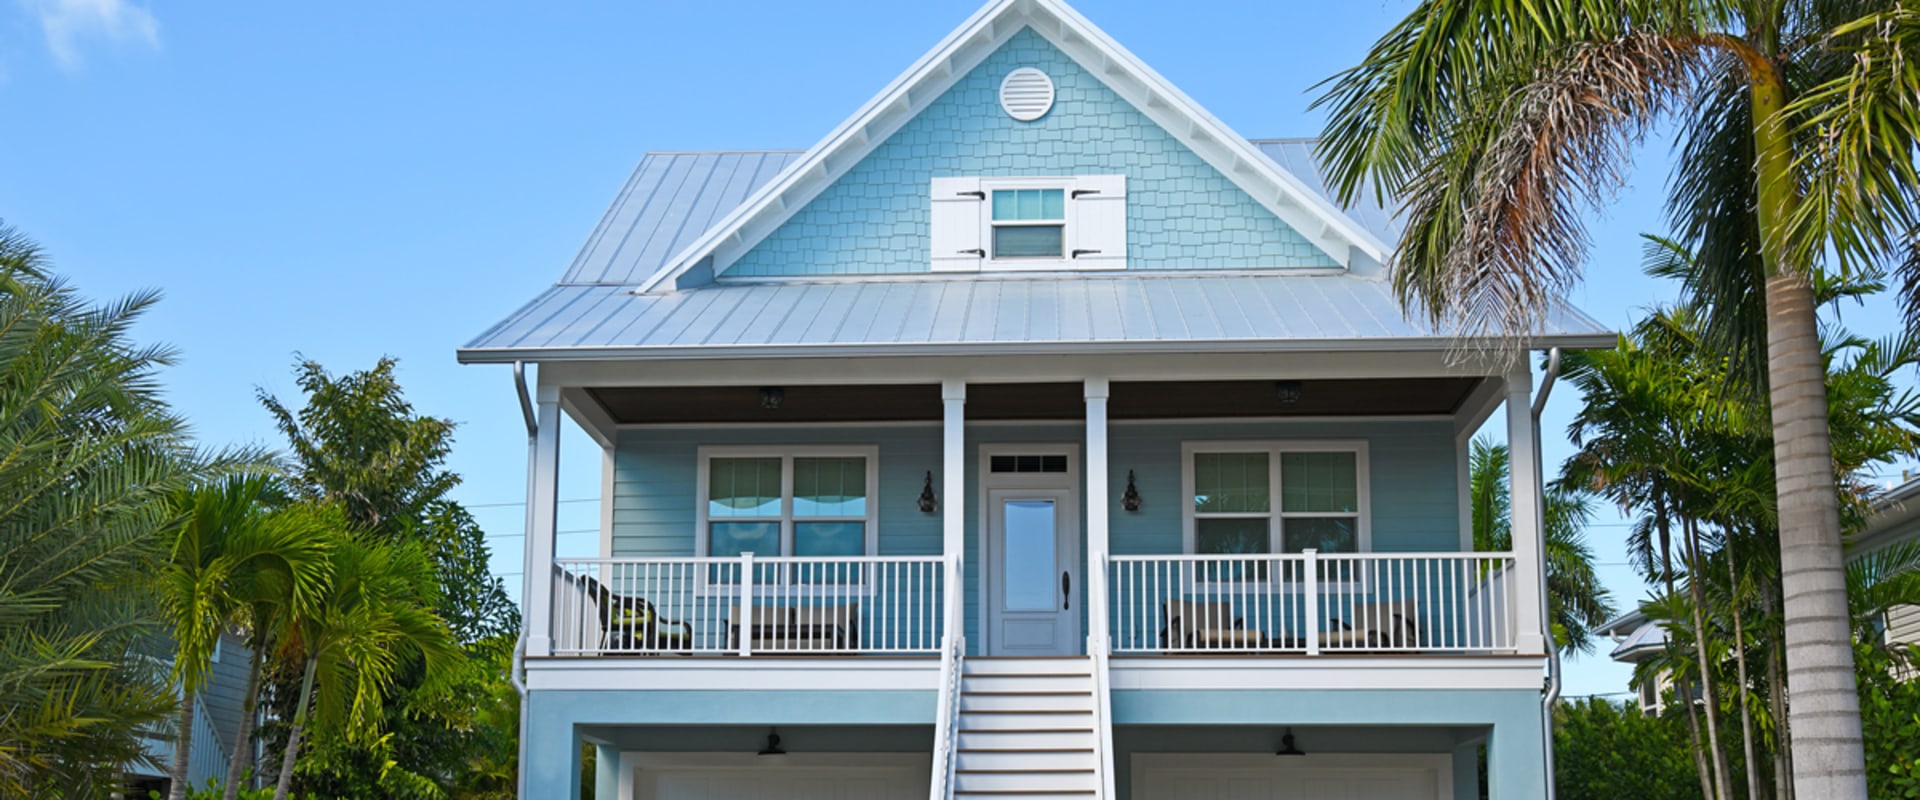 Why You Should Think Twice Before Buying a Beach House